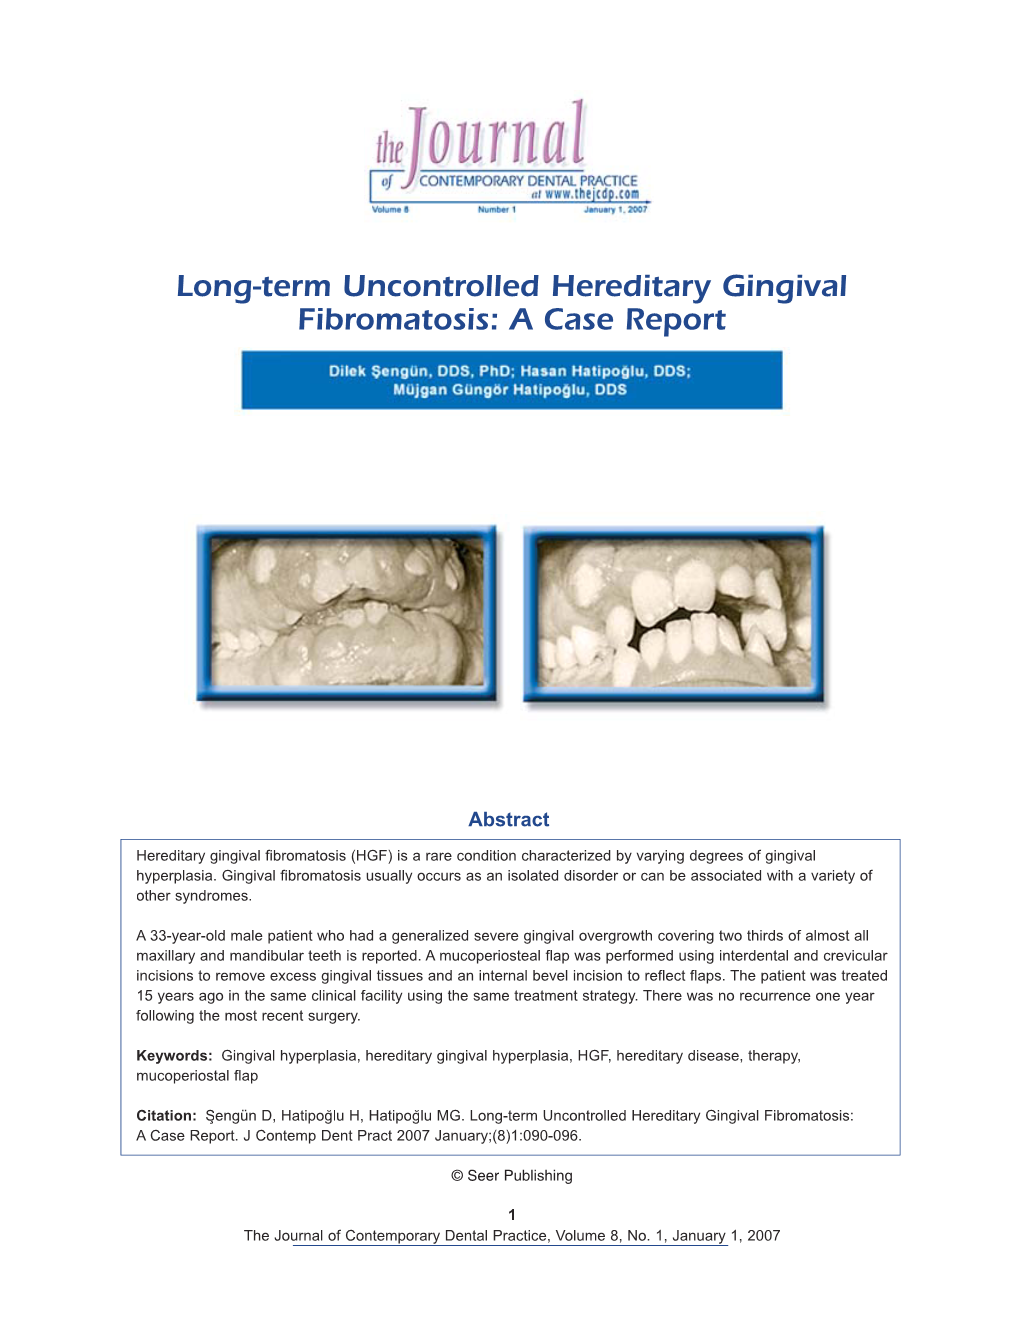 Long-Term Uncontrolled Hereditary Gingival Fibromatosis: a Case Report